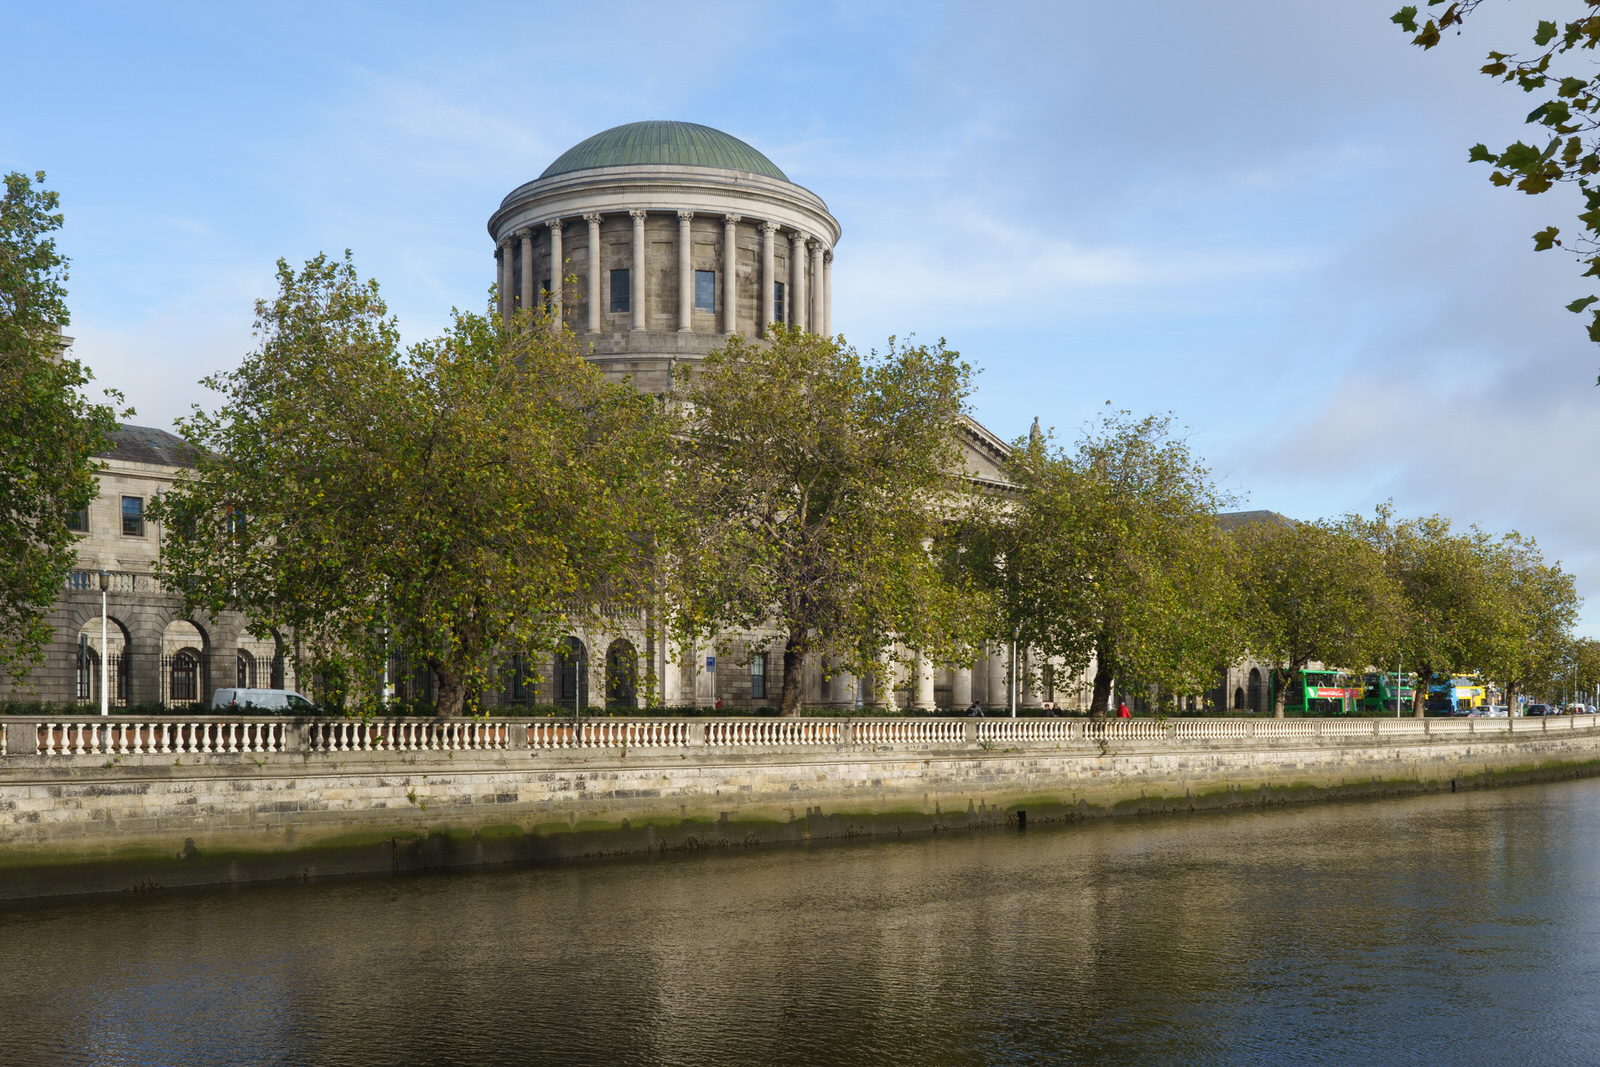 THE FOUR COURTS IN DUBLIN